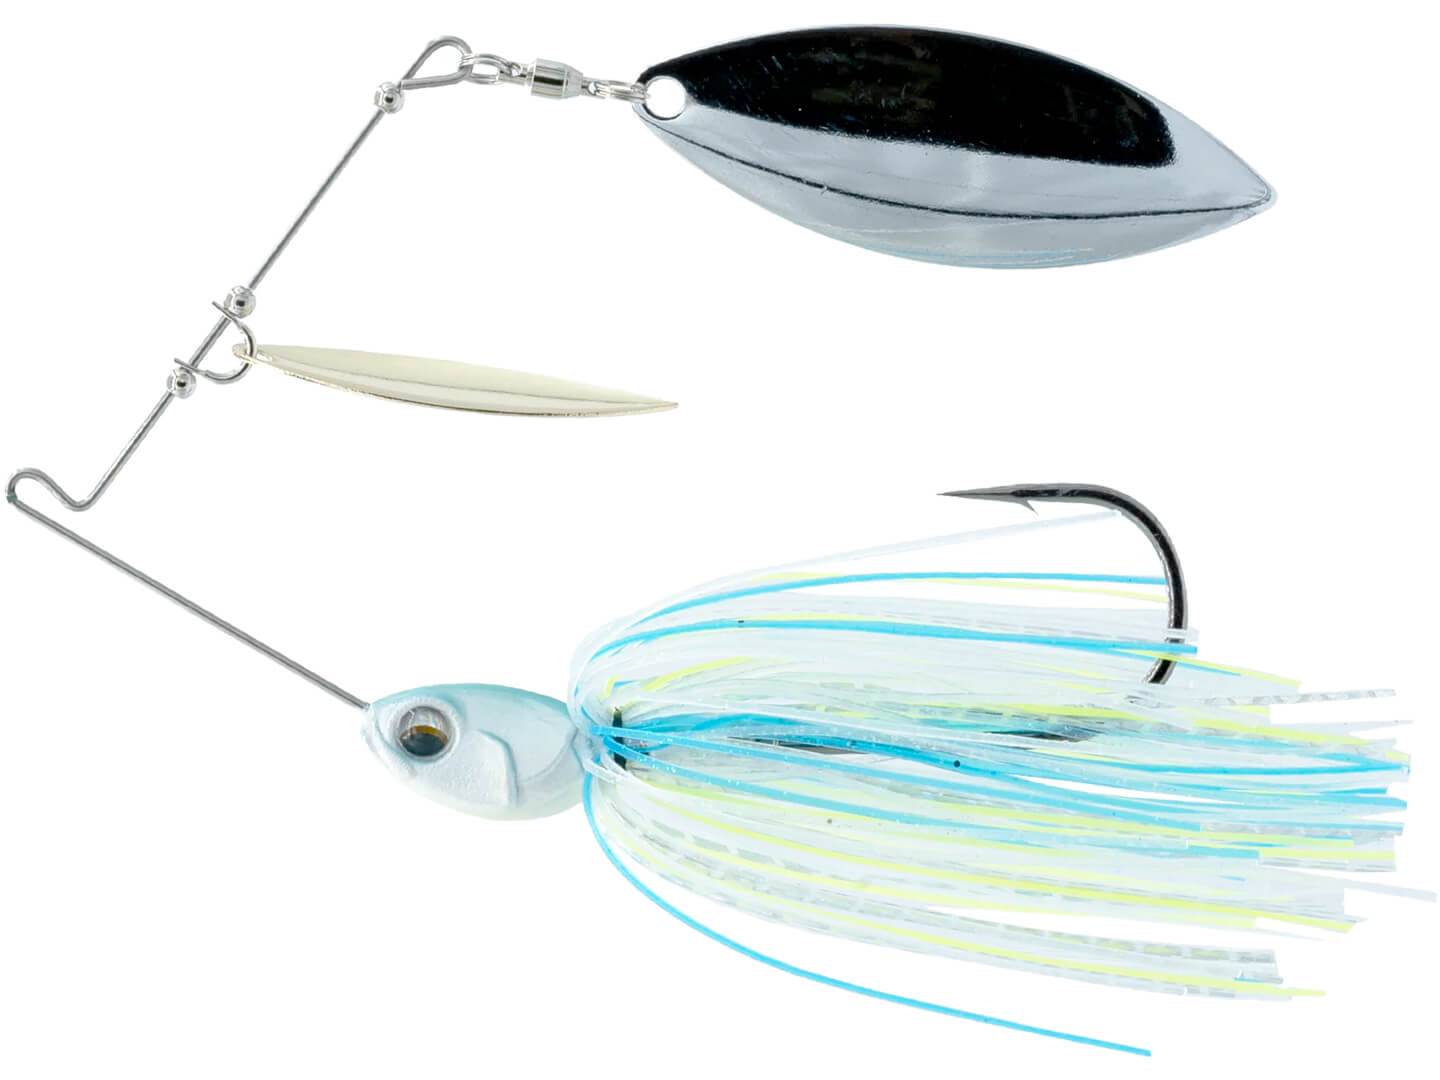 Blade Baits – Harpeth River Outfitters